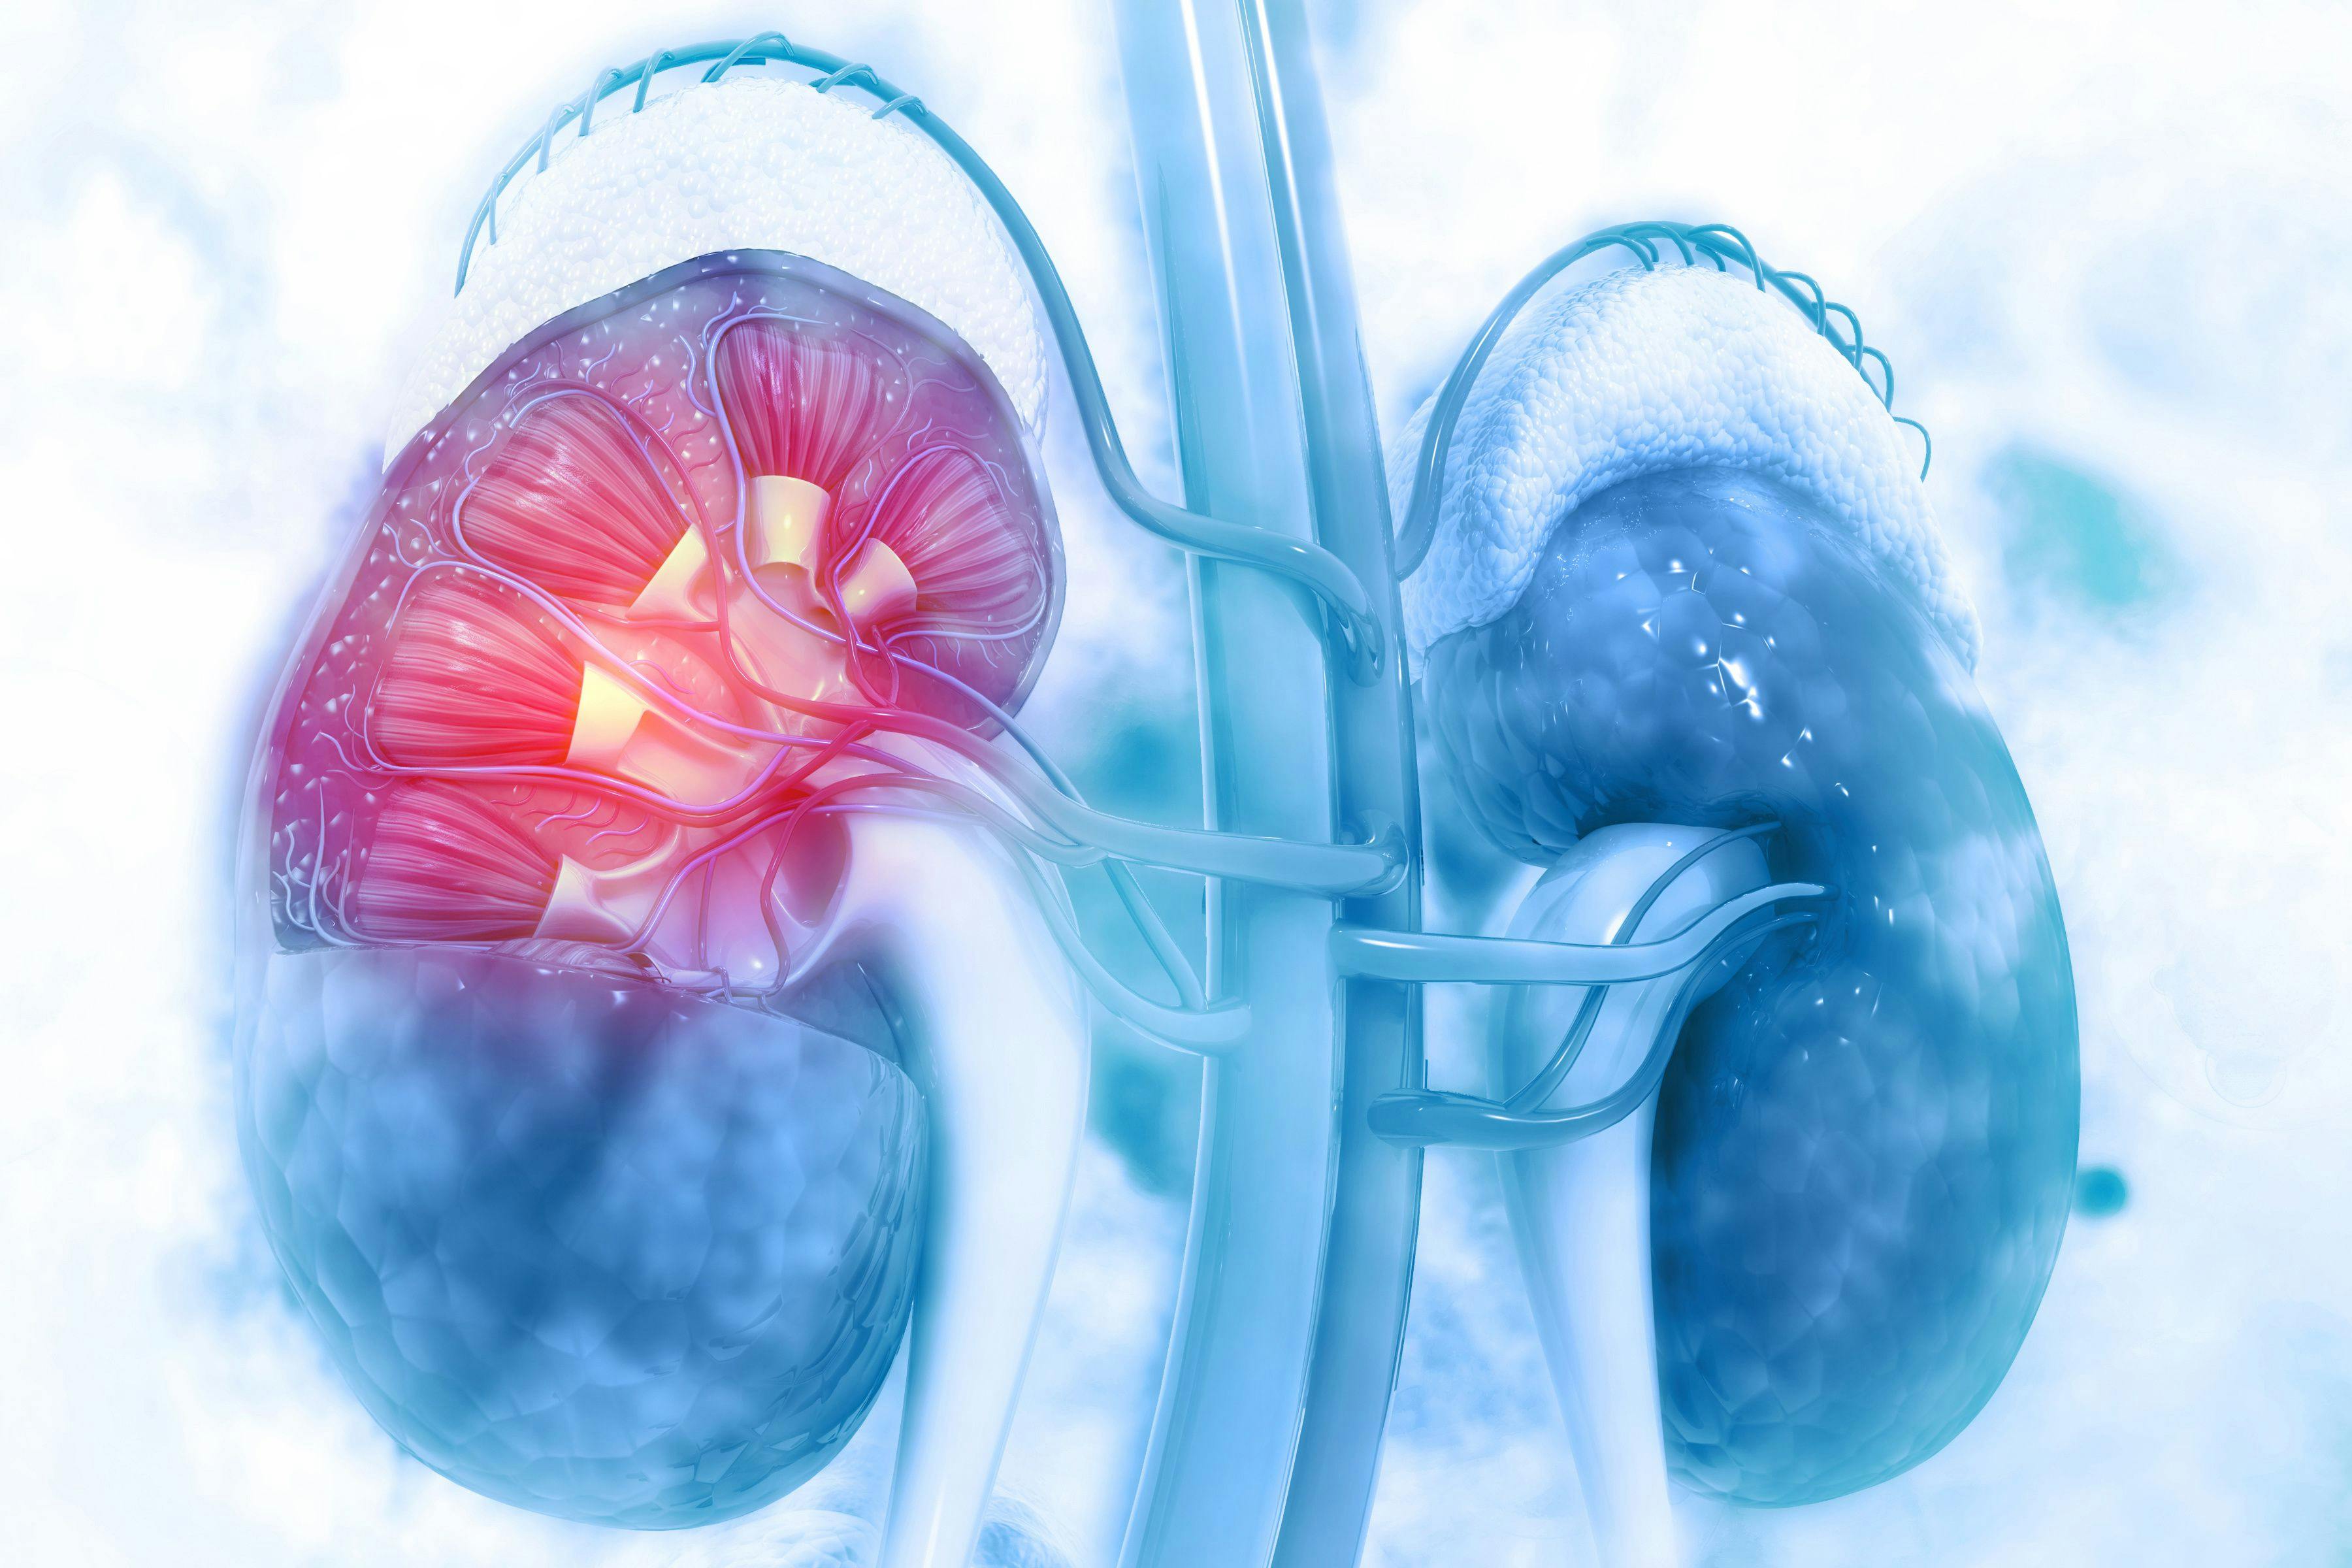 SPS Associated with Higher Risk of GI Complications in Patients with Chronic Kidney Disease